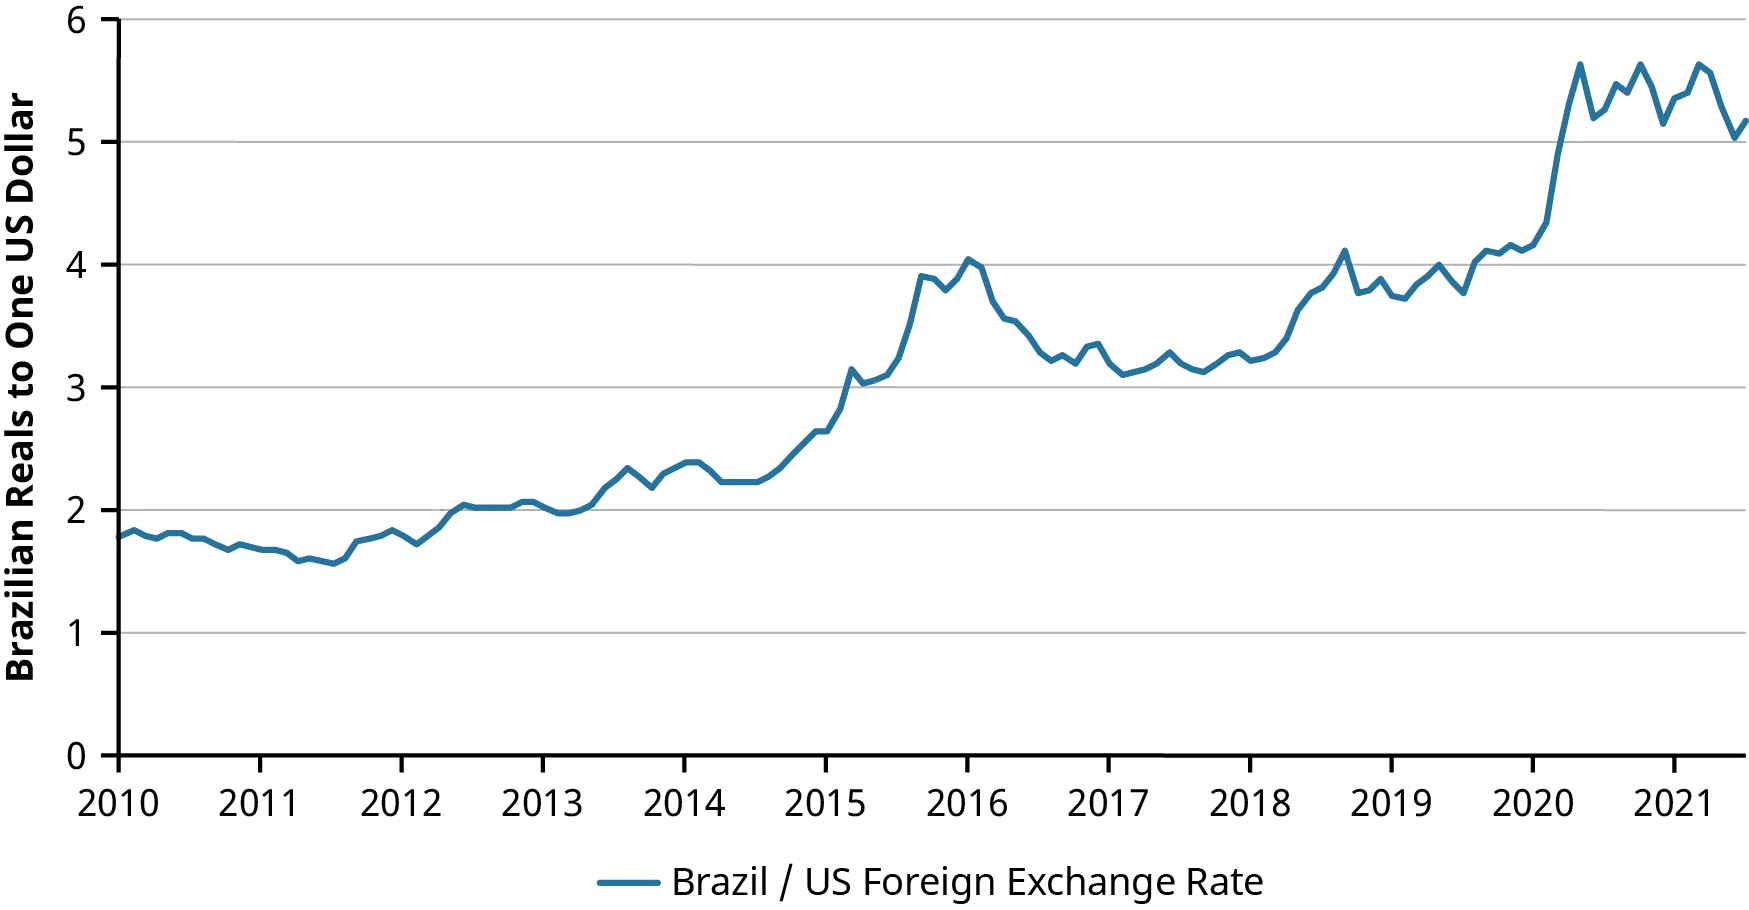 A line graph shows the exchange rate for Brazilian Reals to One U.S. Dollar from 2010 through 2021. The low point of the graph occurs in 2011, when the exchange rate was less than 2 Brazilian Reals to 1 U.S. Dollar. The high point of the graph occurs in 2020, when the exchange rate was about 5.5 Brazilian Reals to 1 U.S. dollar.